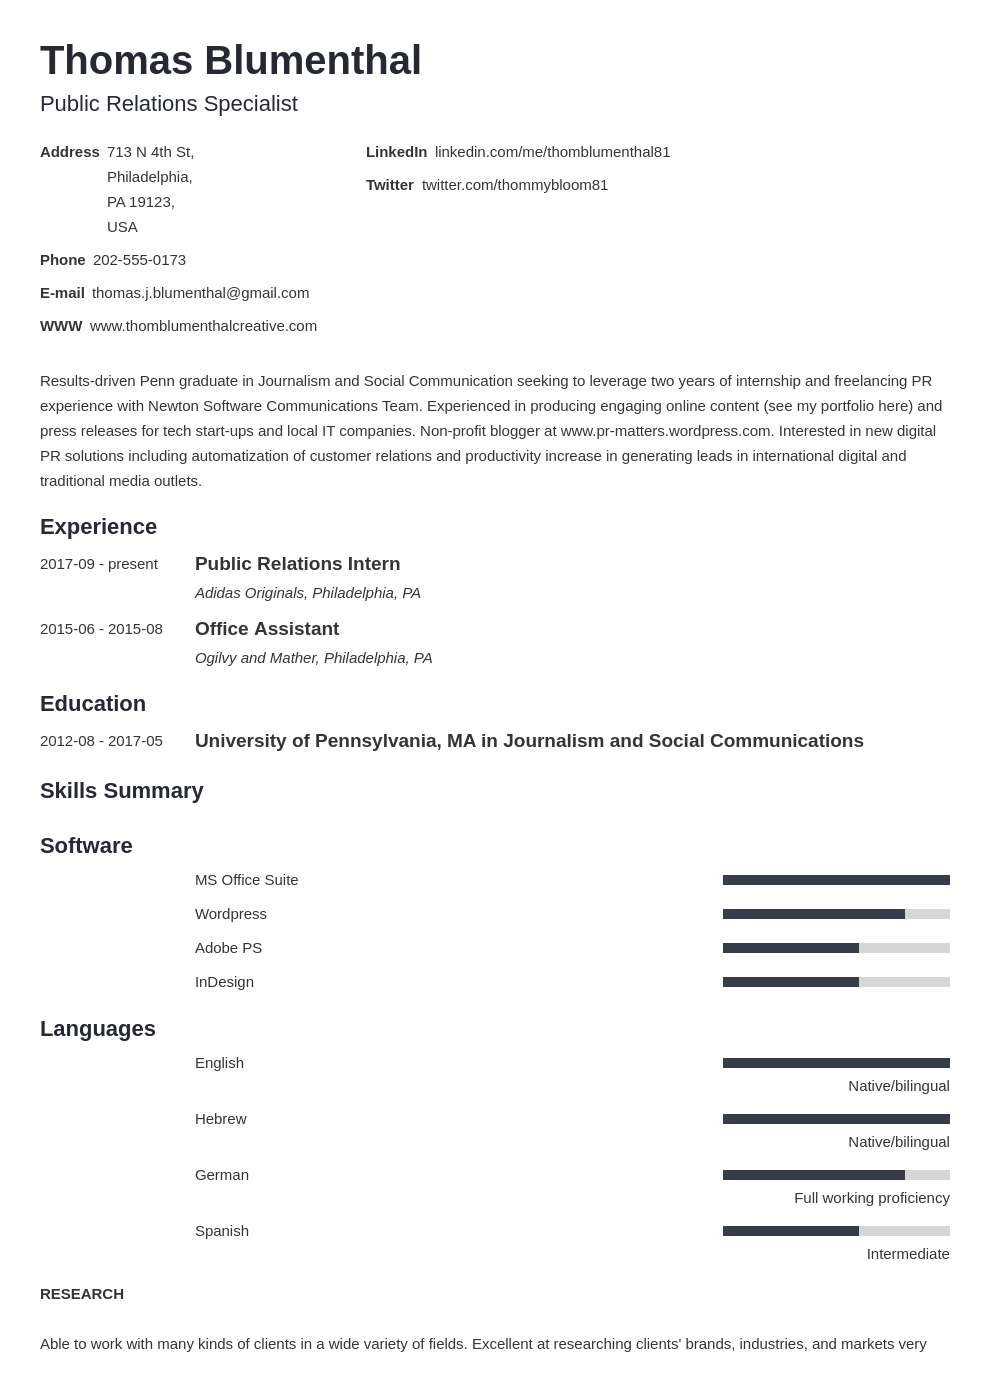 what is a functional resume used for